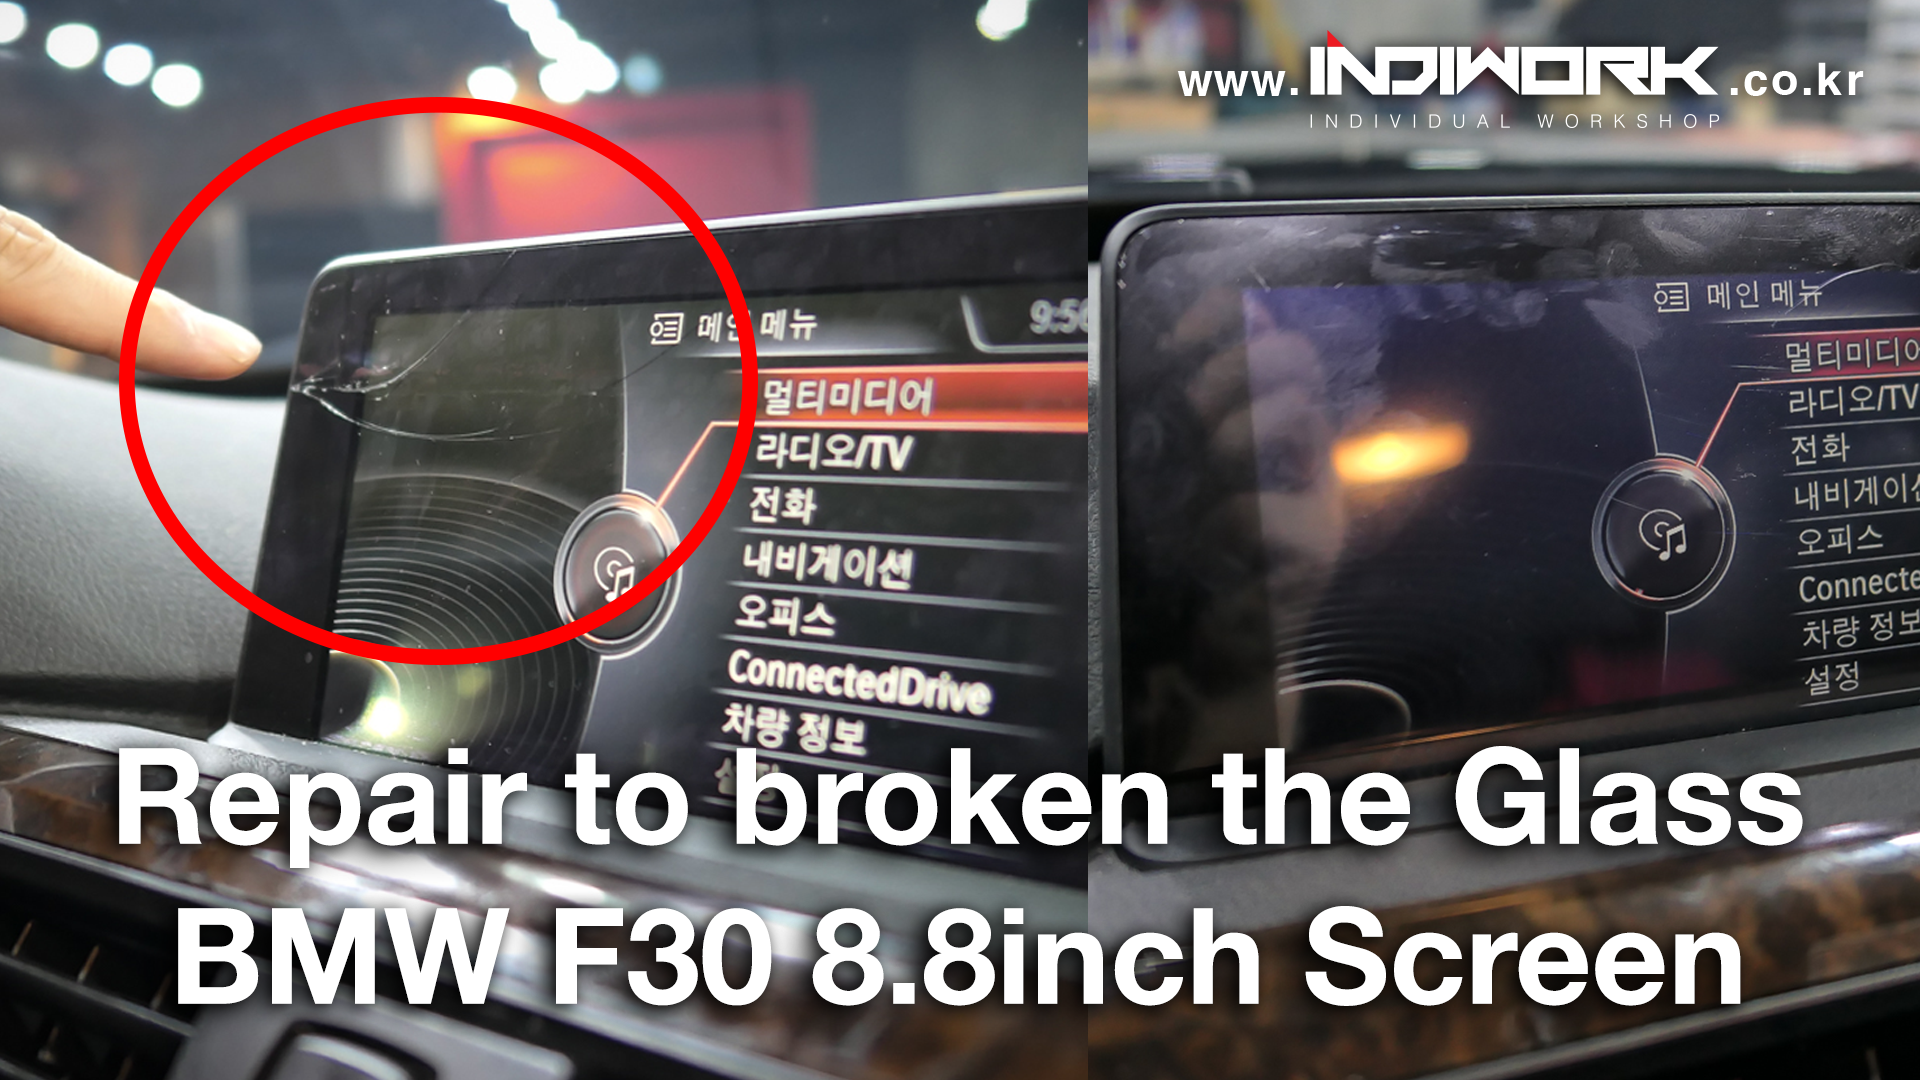 Repair to broken the Glass BMW F30 8.8inch Screen